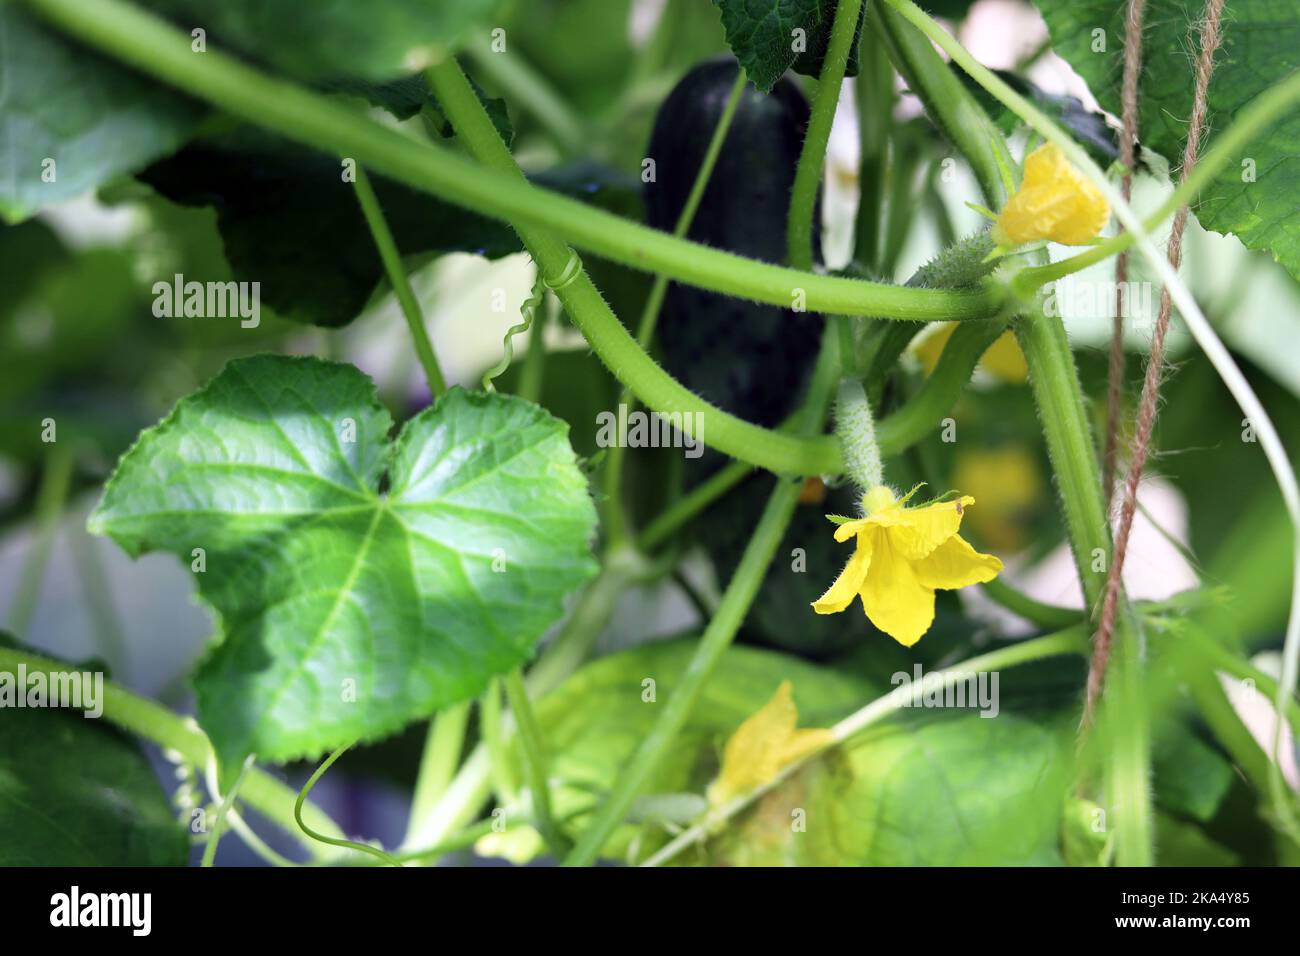 The cucumber fruit grows on a whip Stock Photo